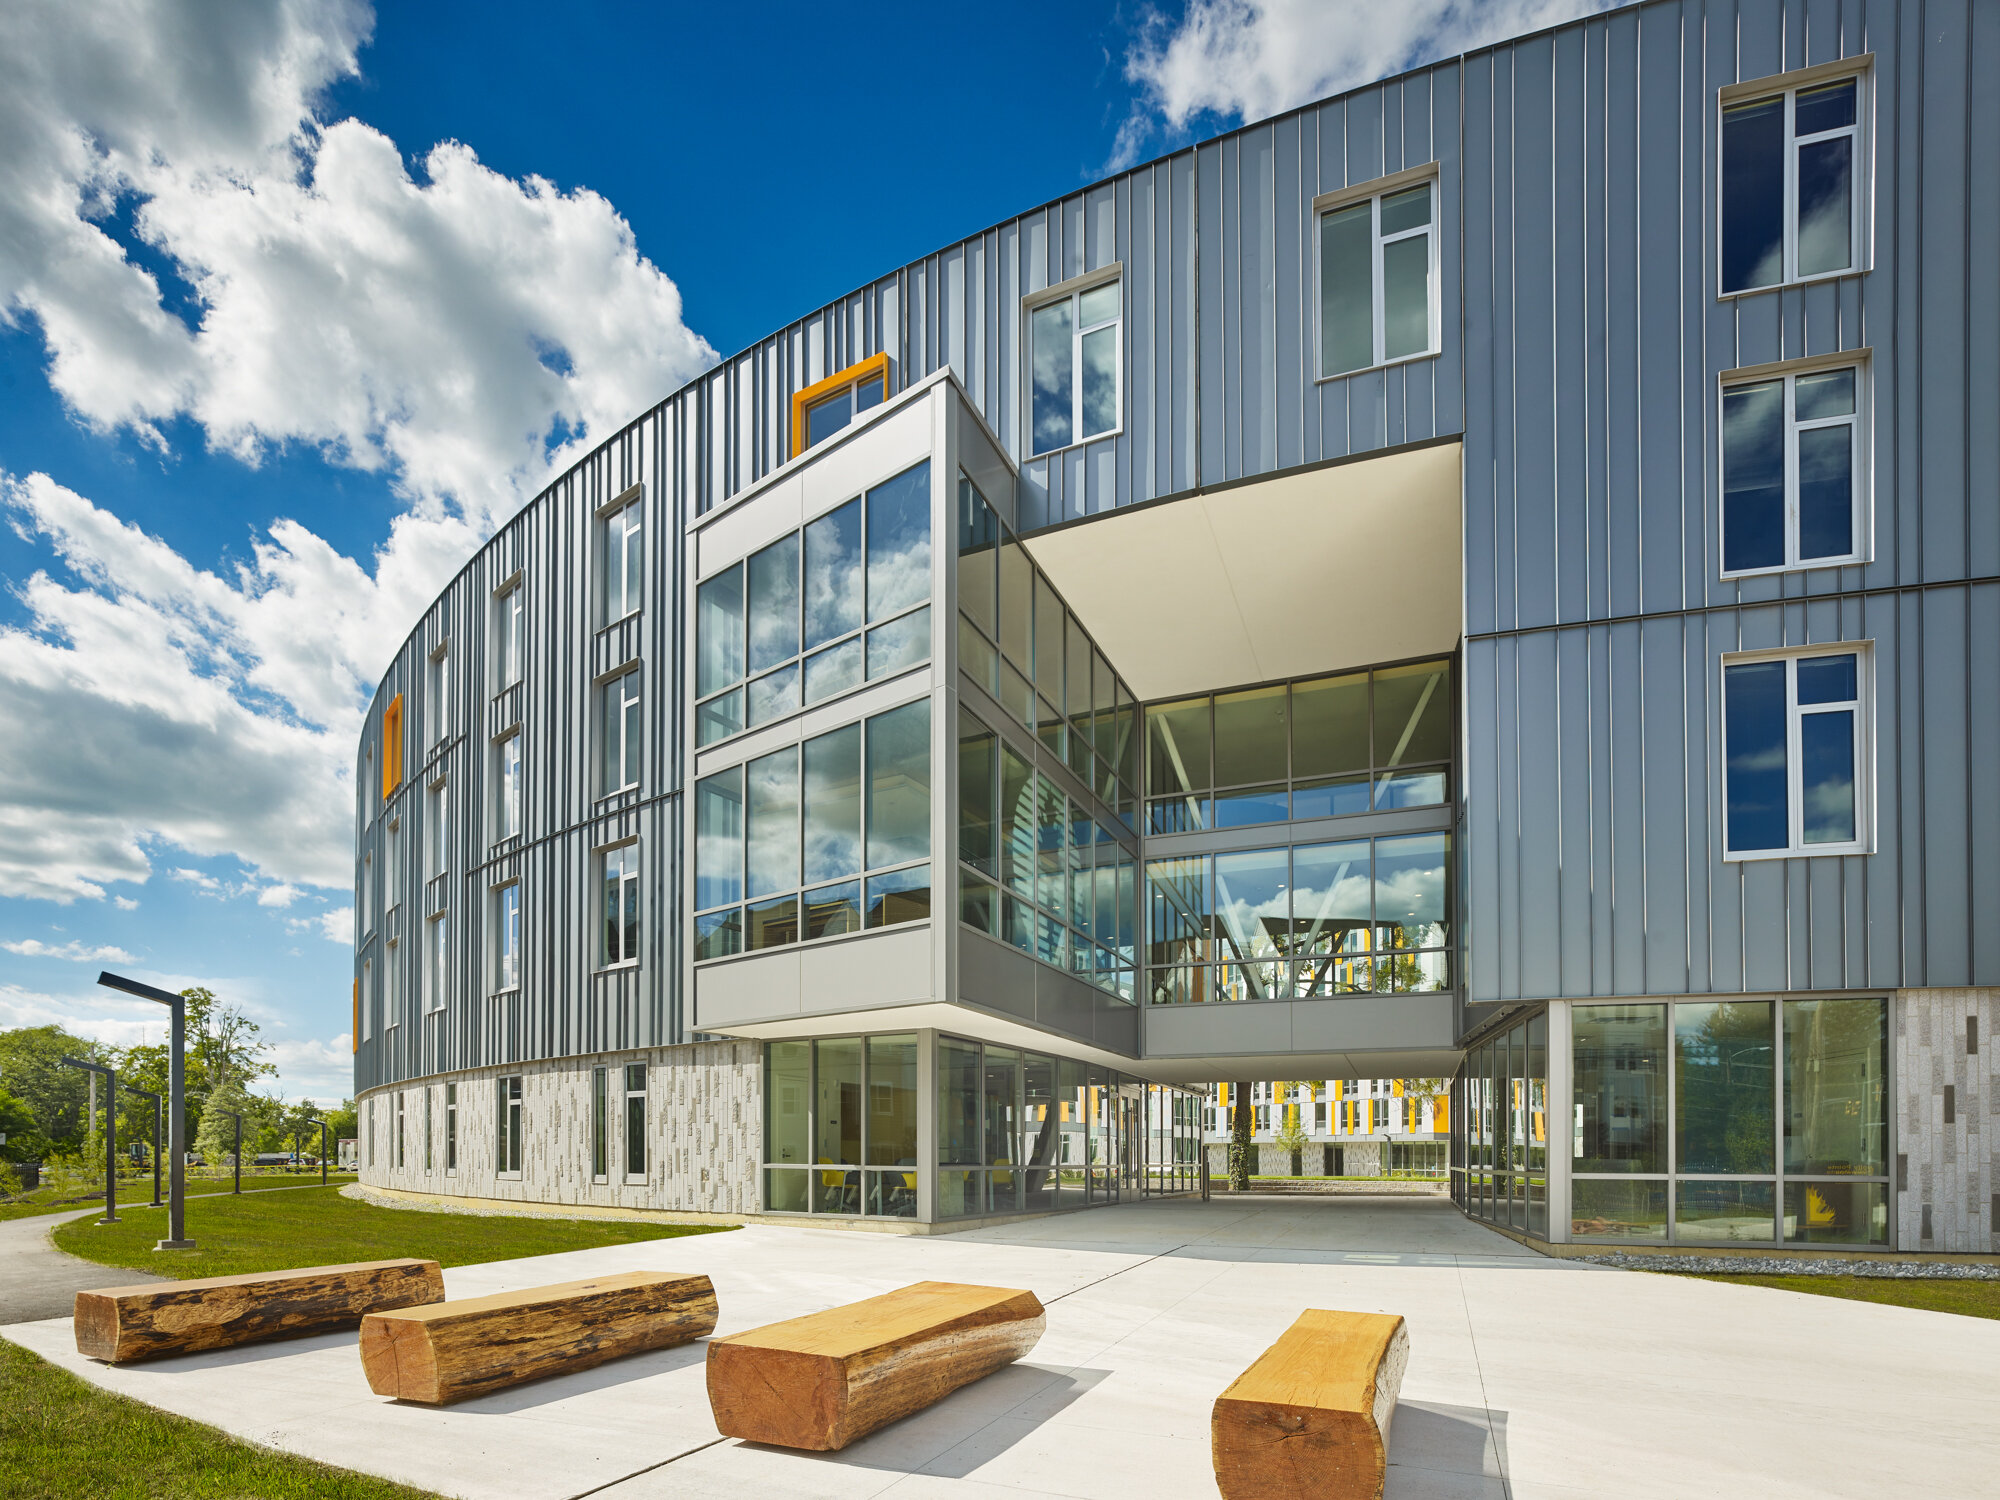 Erdy McHenry Architecture - Rowan University Holly Pointe Commons